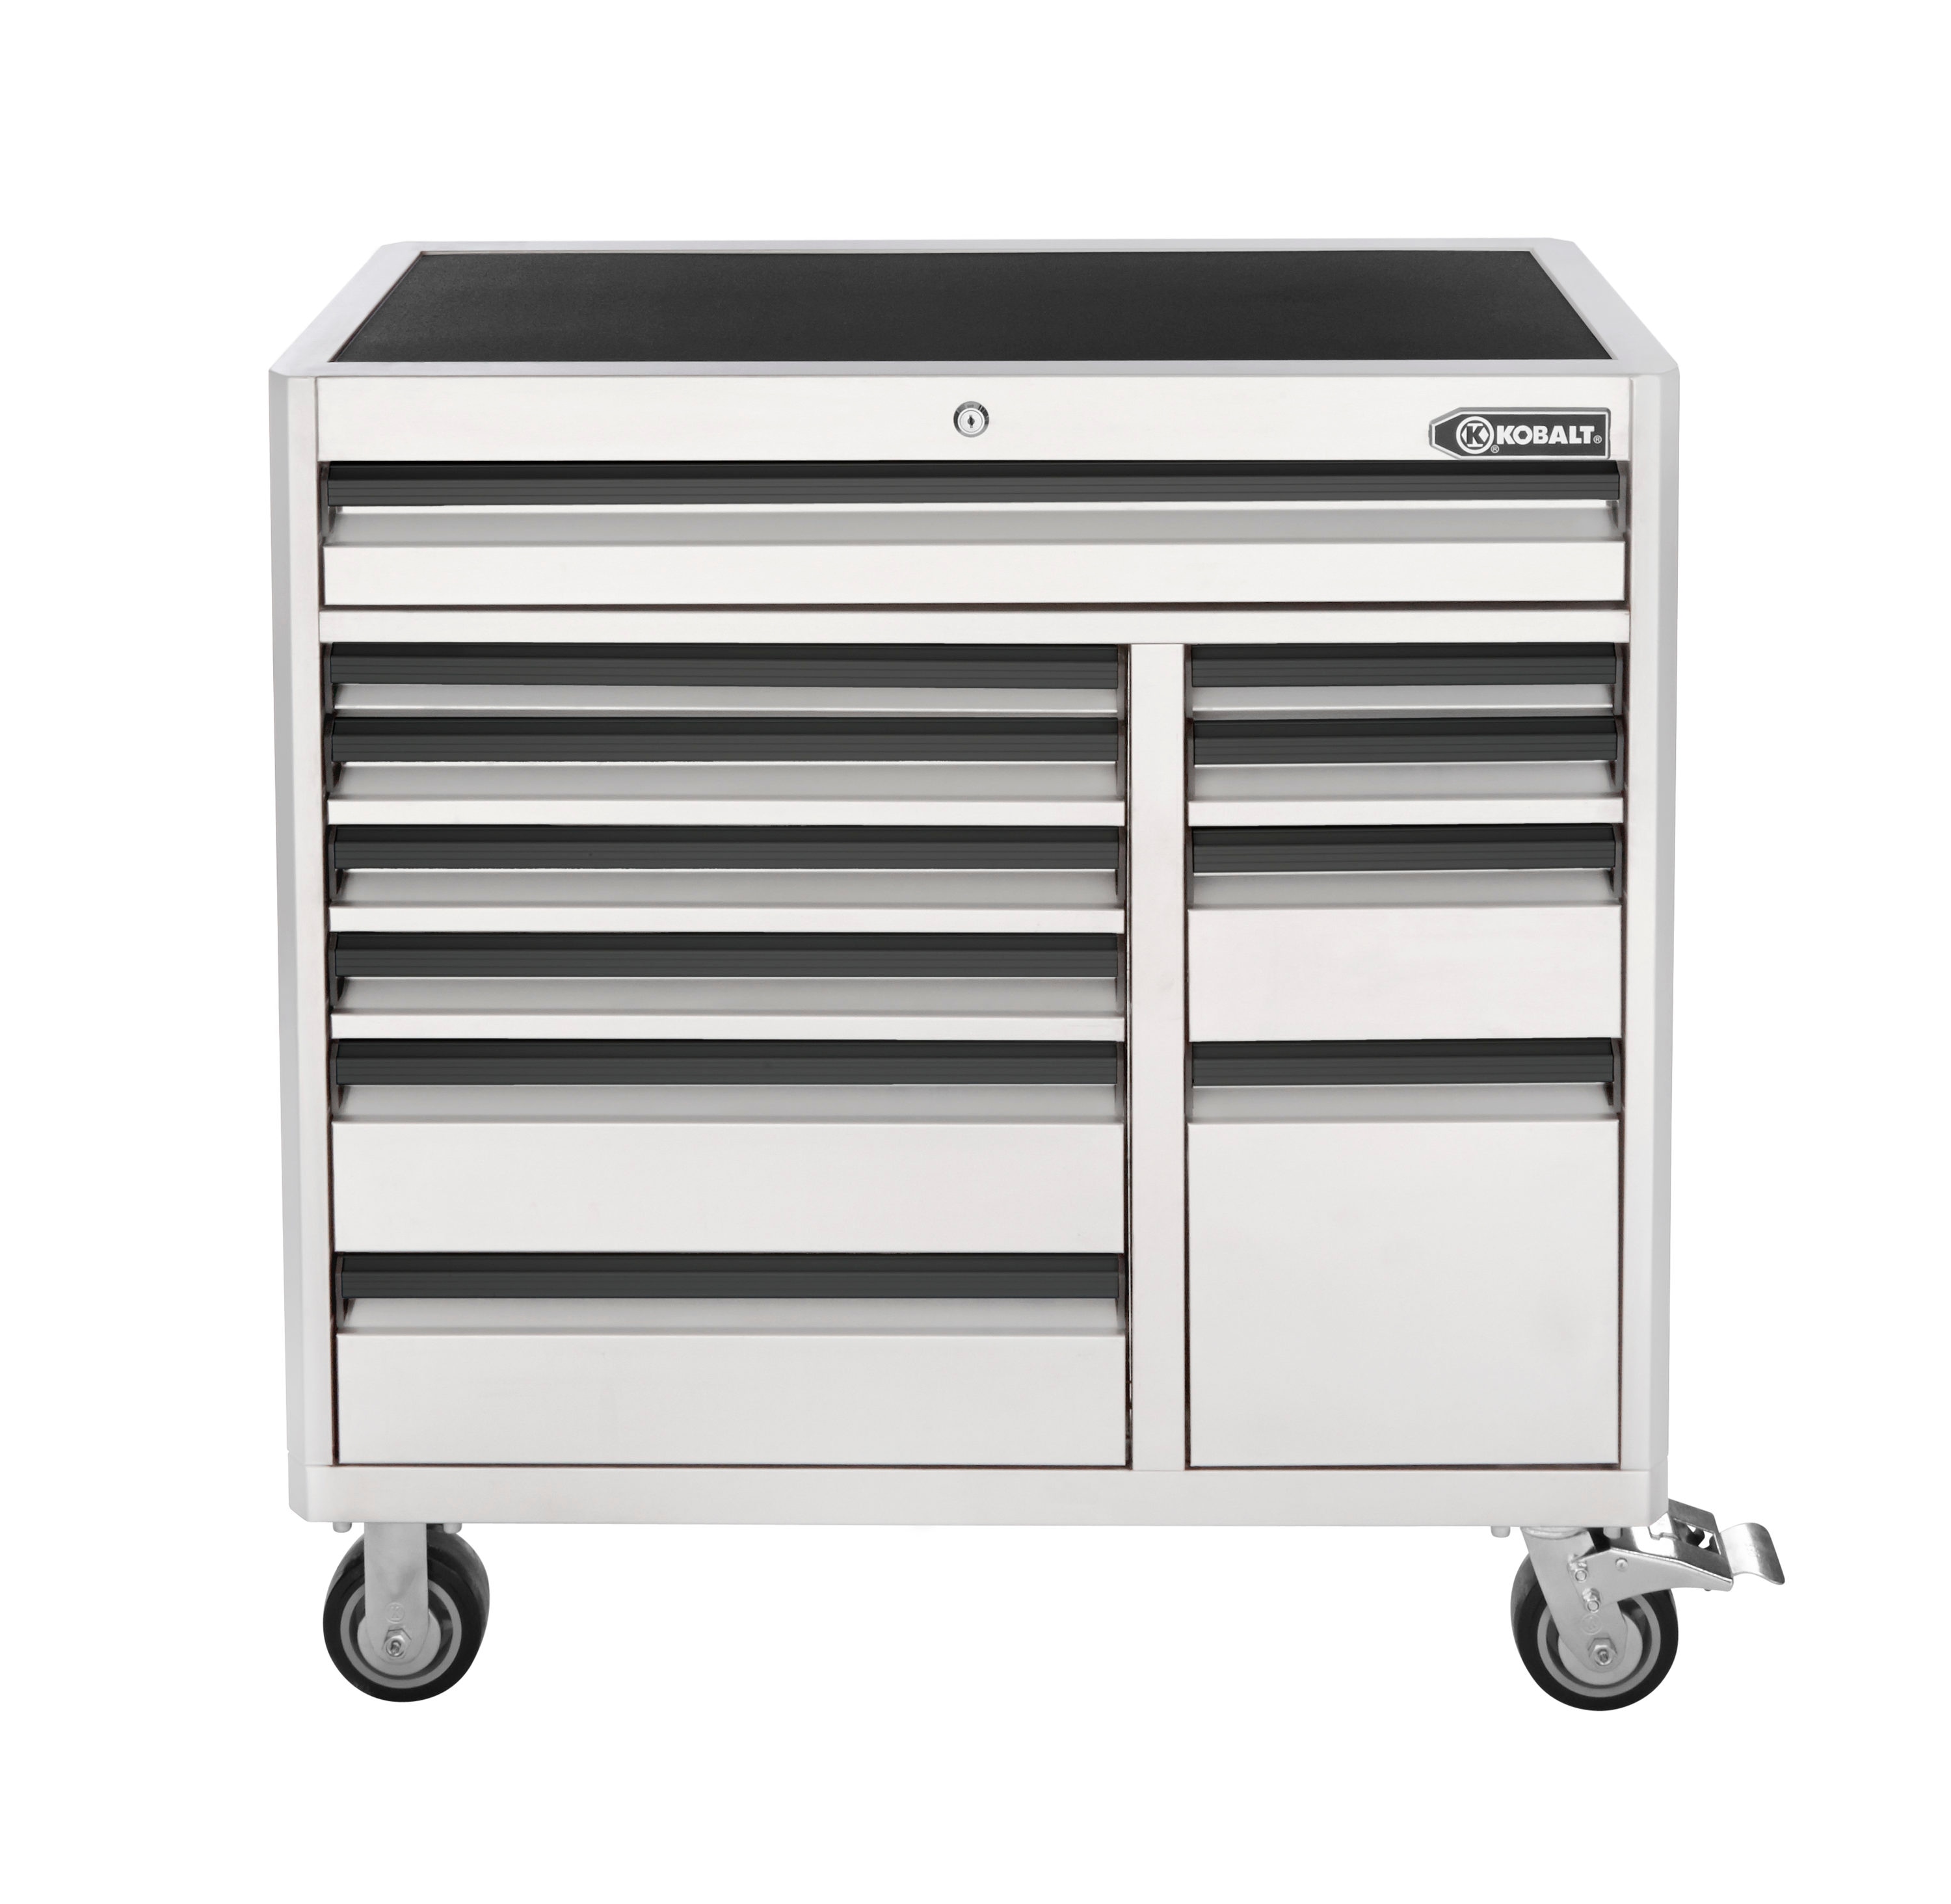 Kobalt Io Kblt 41 In Rolling Cart White In The Bottom Tool Cabinets Department At Lowes Com